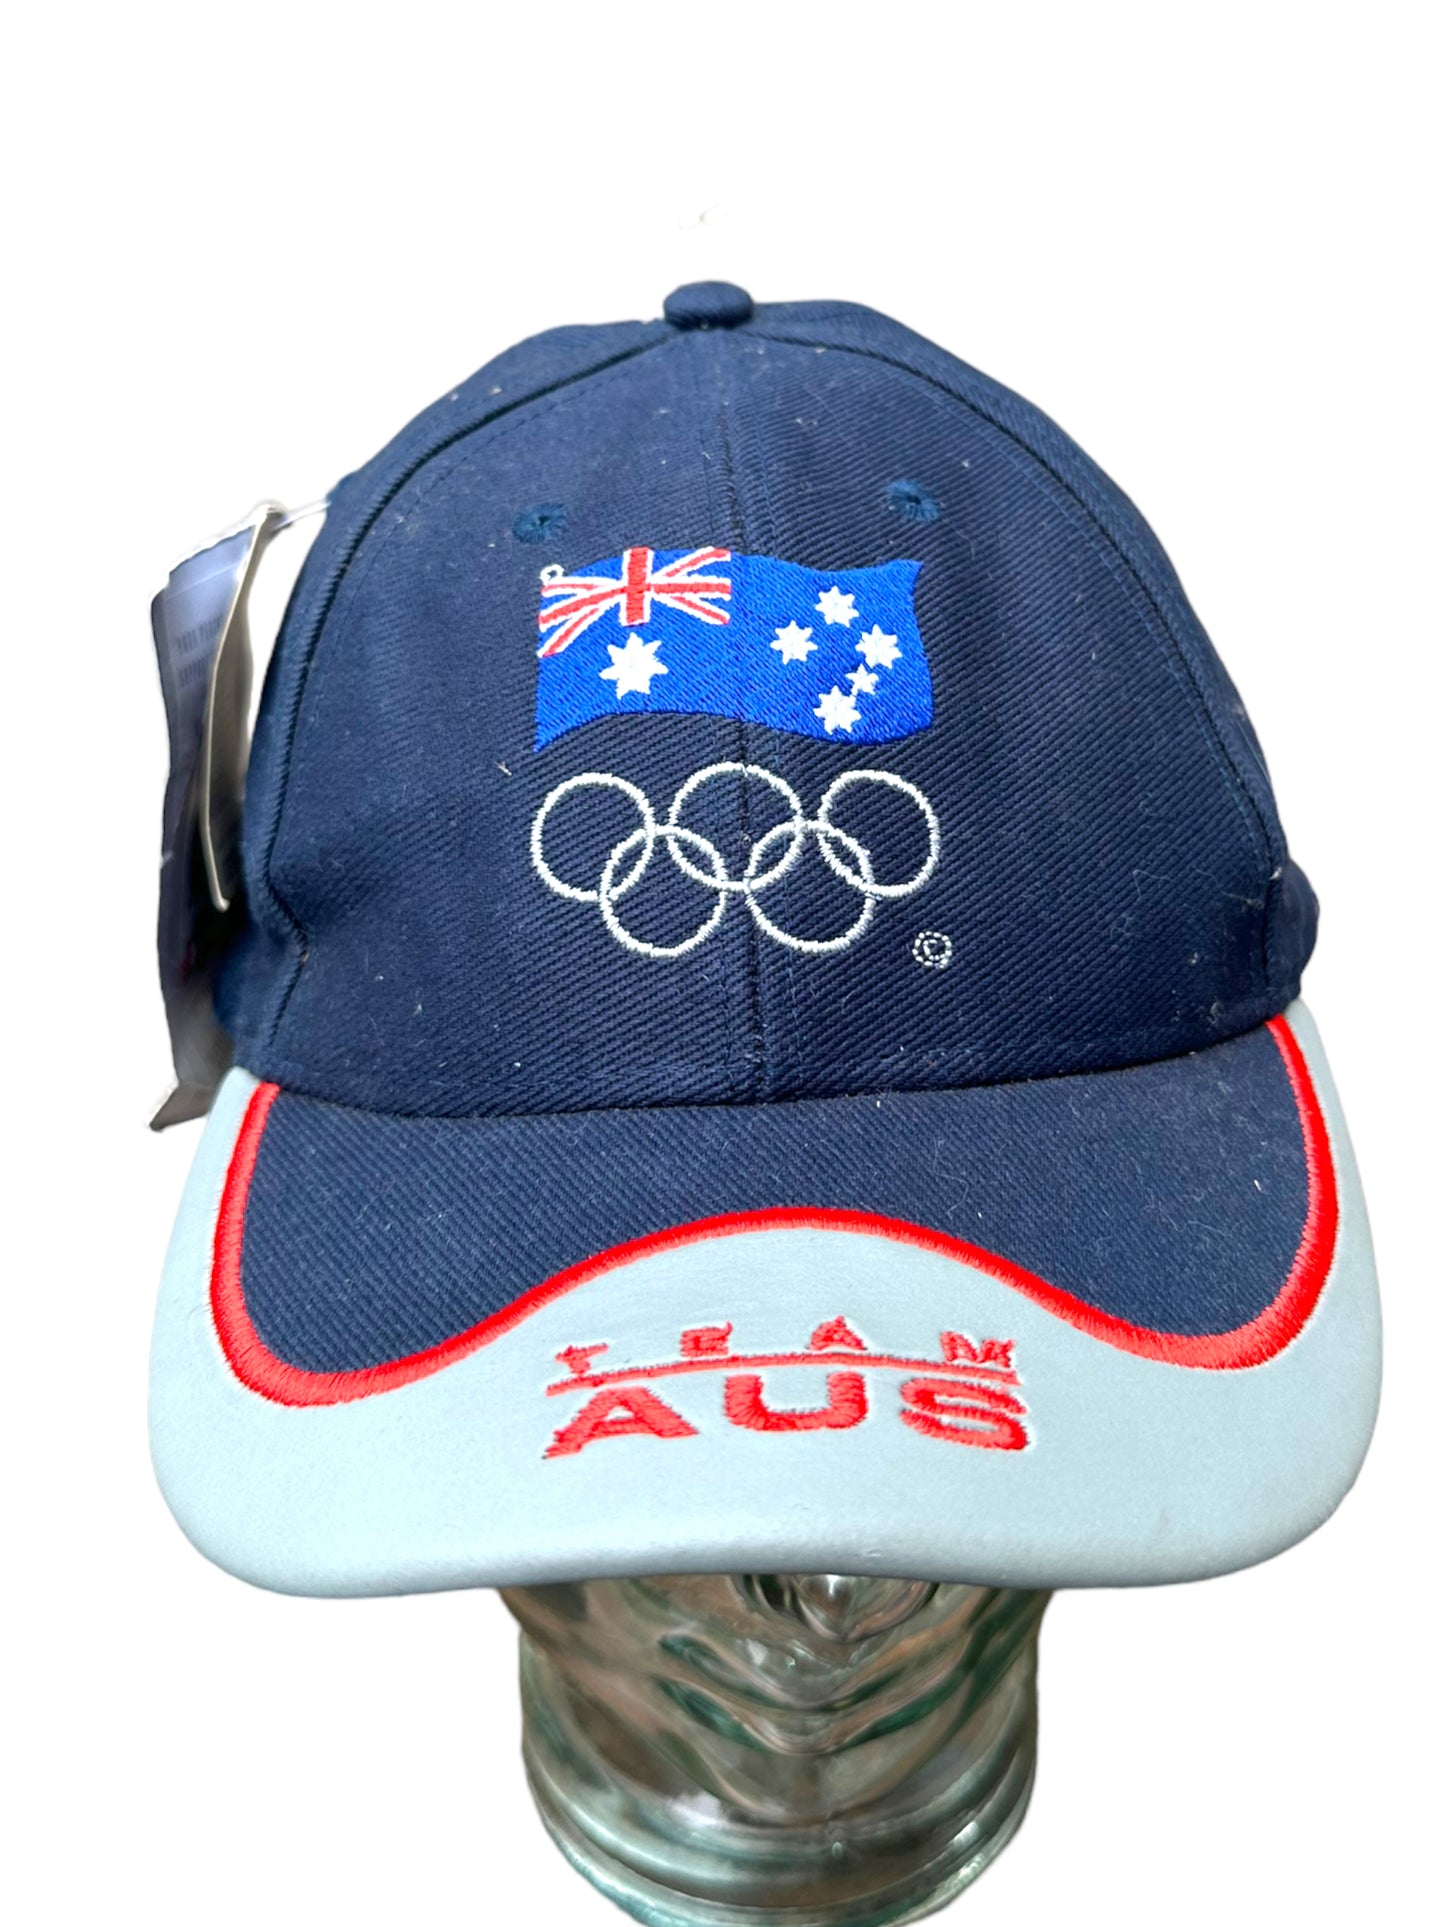 AUSTRALIA 2000 SYDNEY OLYMPIC GAMES HAT WITH TAGS